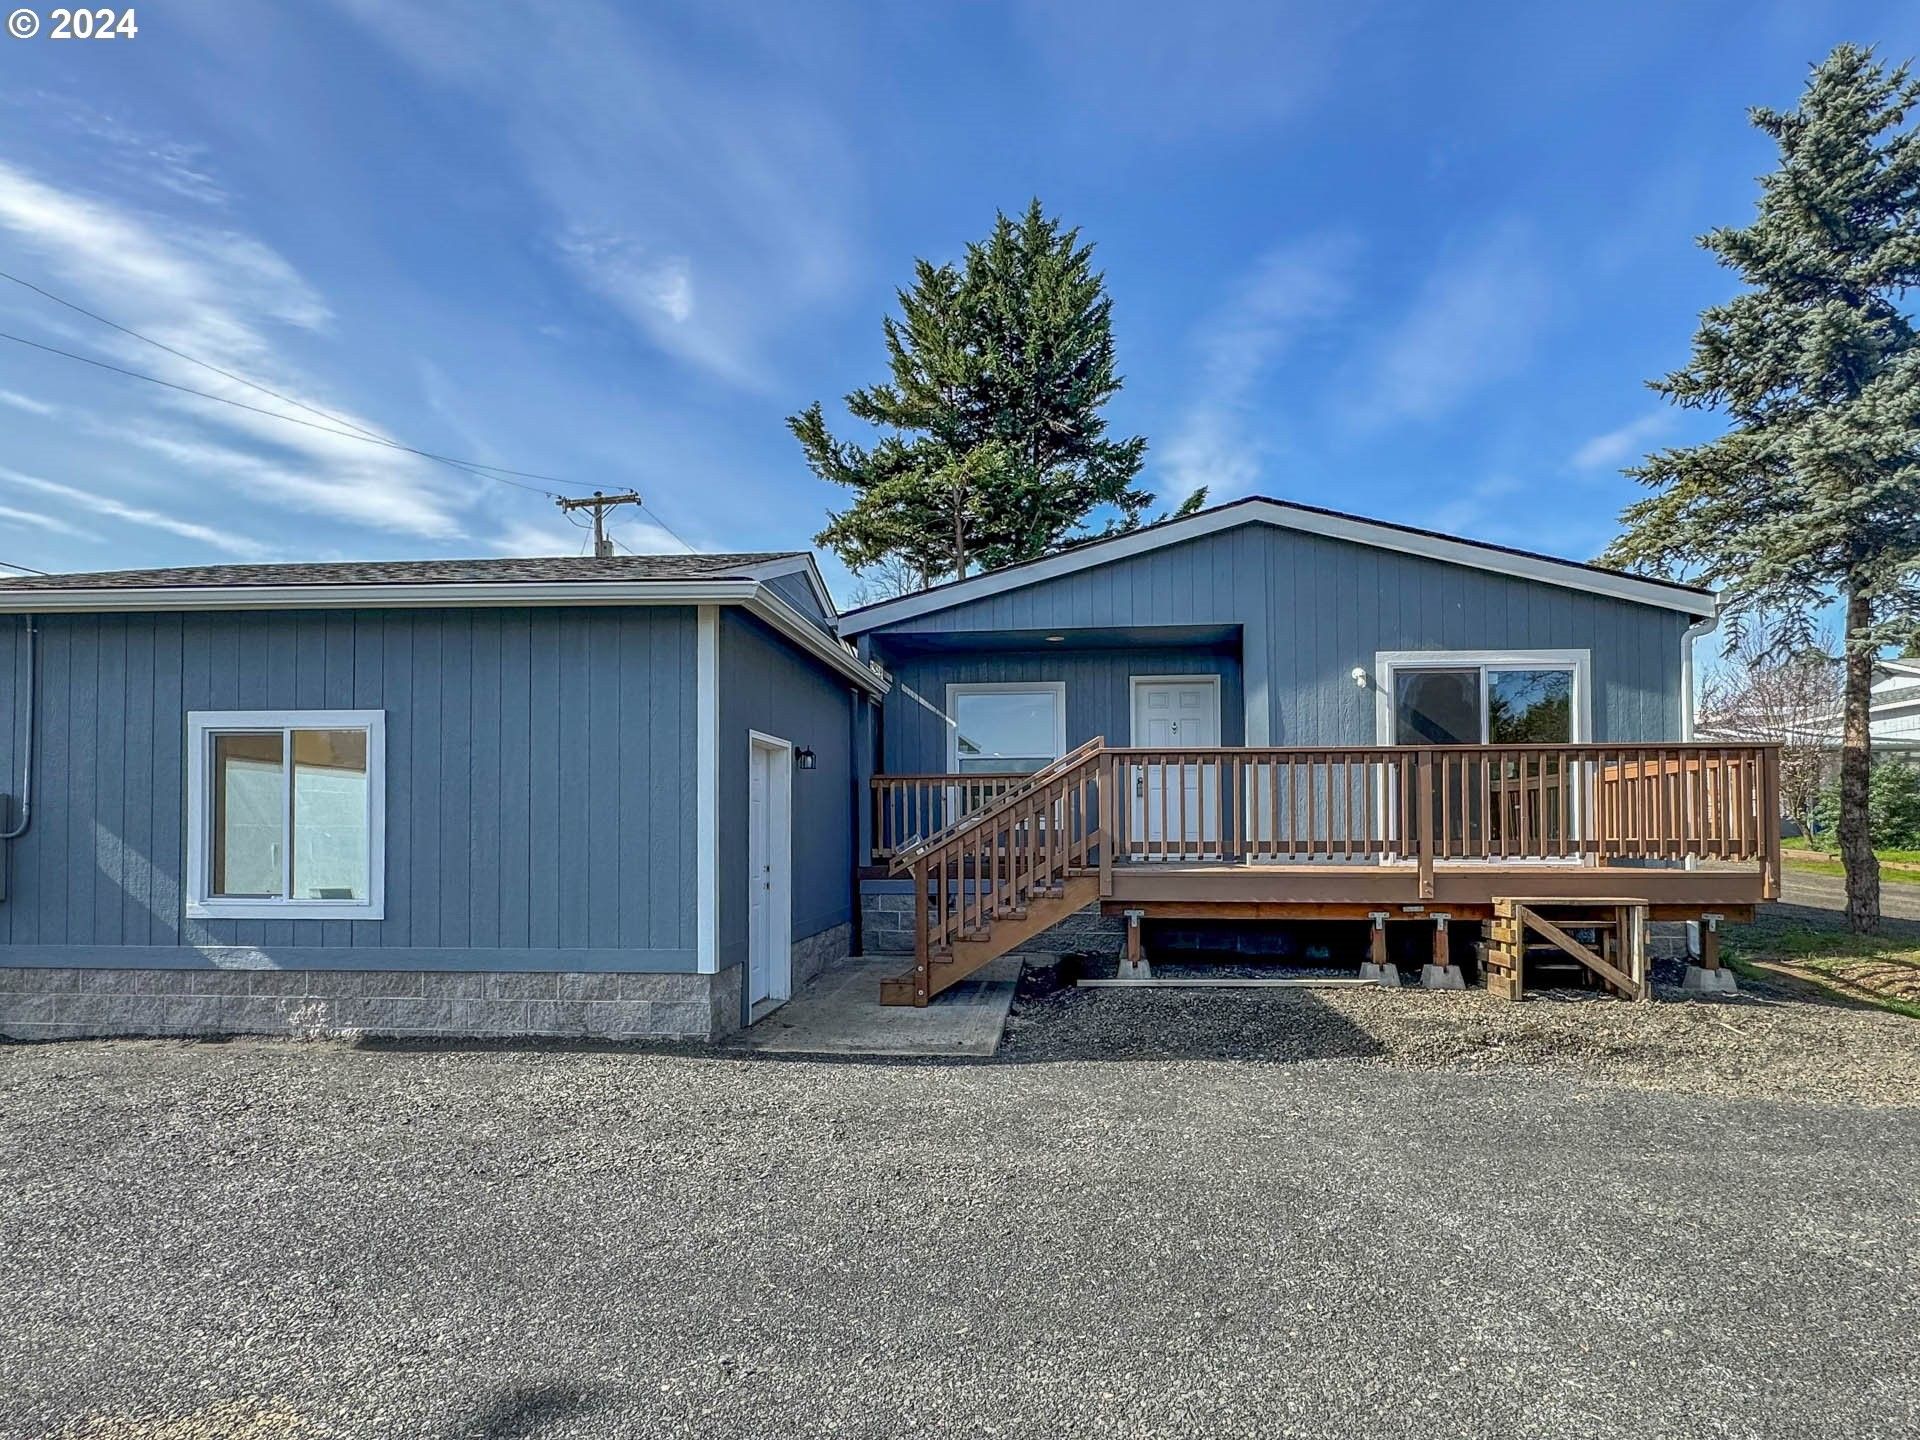 109 Nw Woodland Dr. Winston, OR 97496